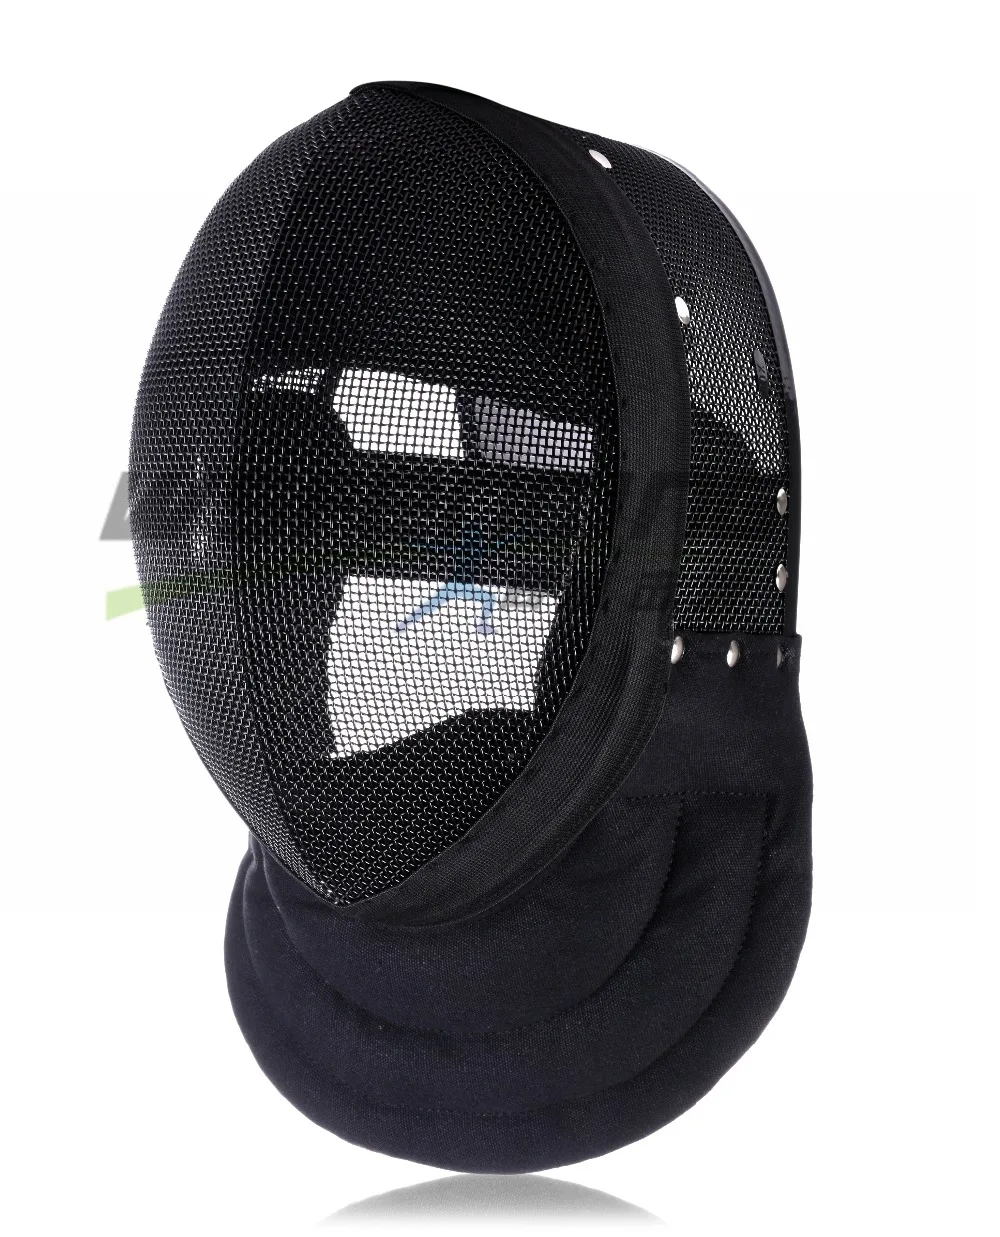 forbedre snave konjugat Wsfencing 1600n Hema Mask, Fencing Coach Mask With Detachable Lining -  Sports Helmets - AliExpress